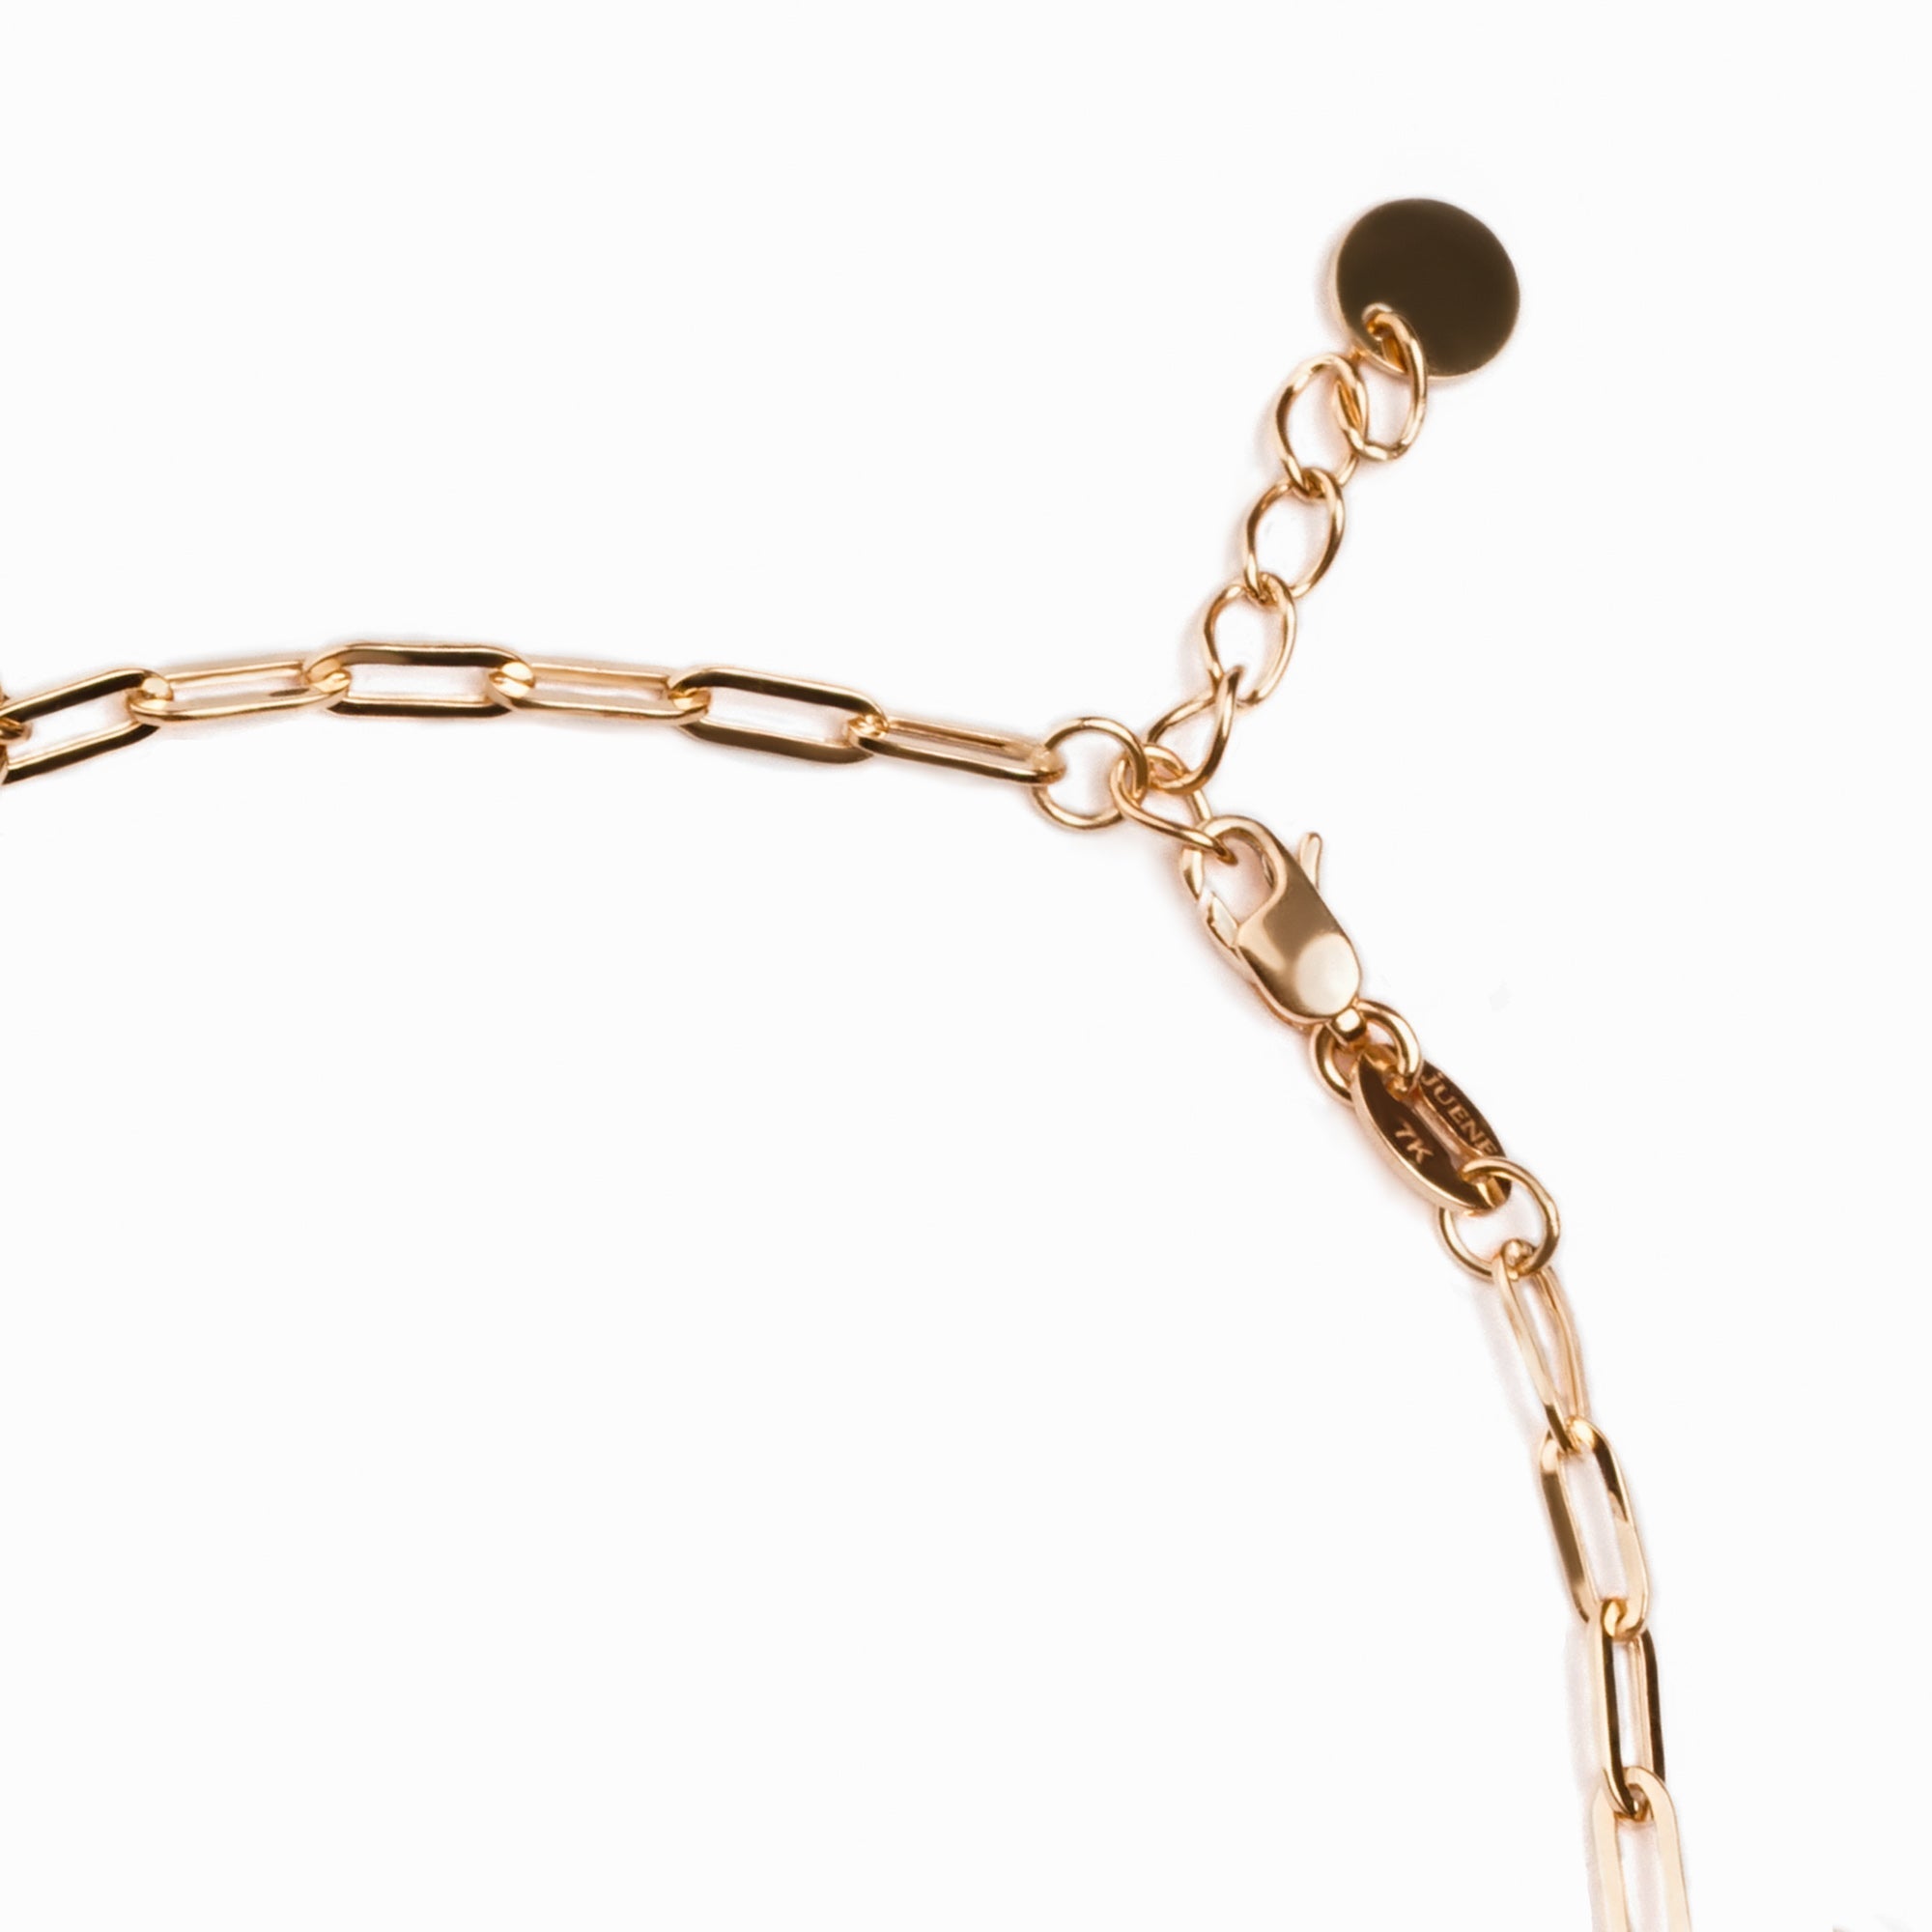 Chara Gold Bracelet - Modest Collection - Juene Jewelry